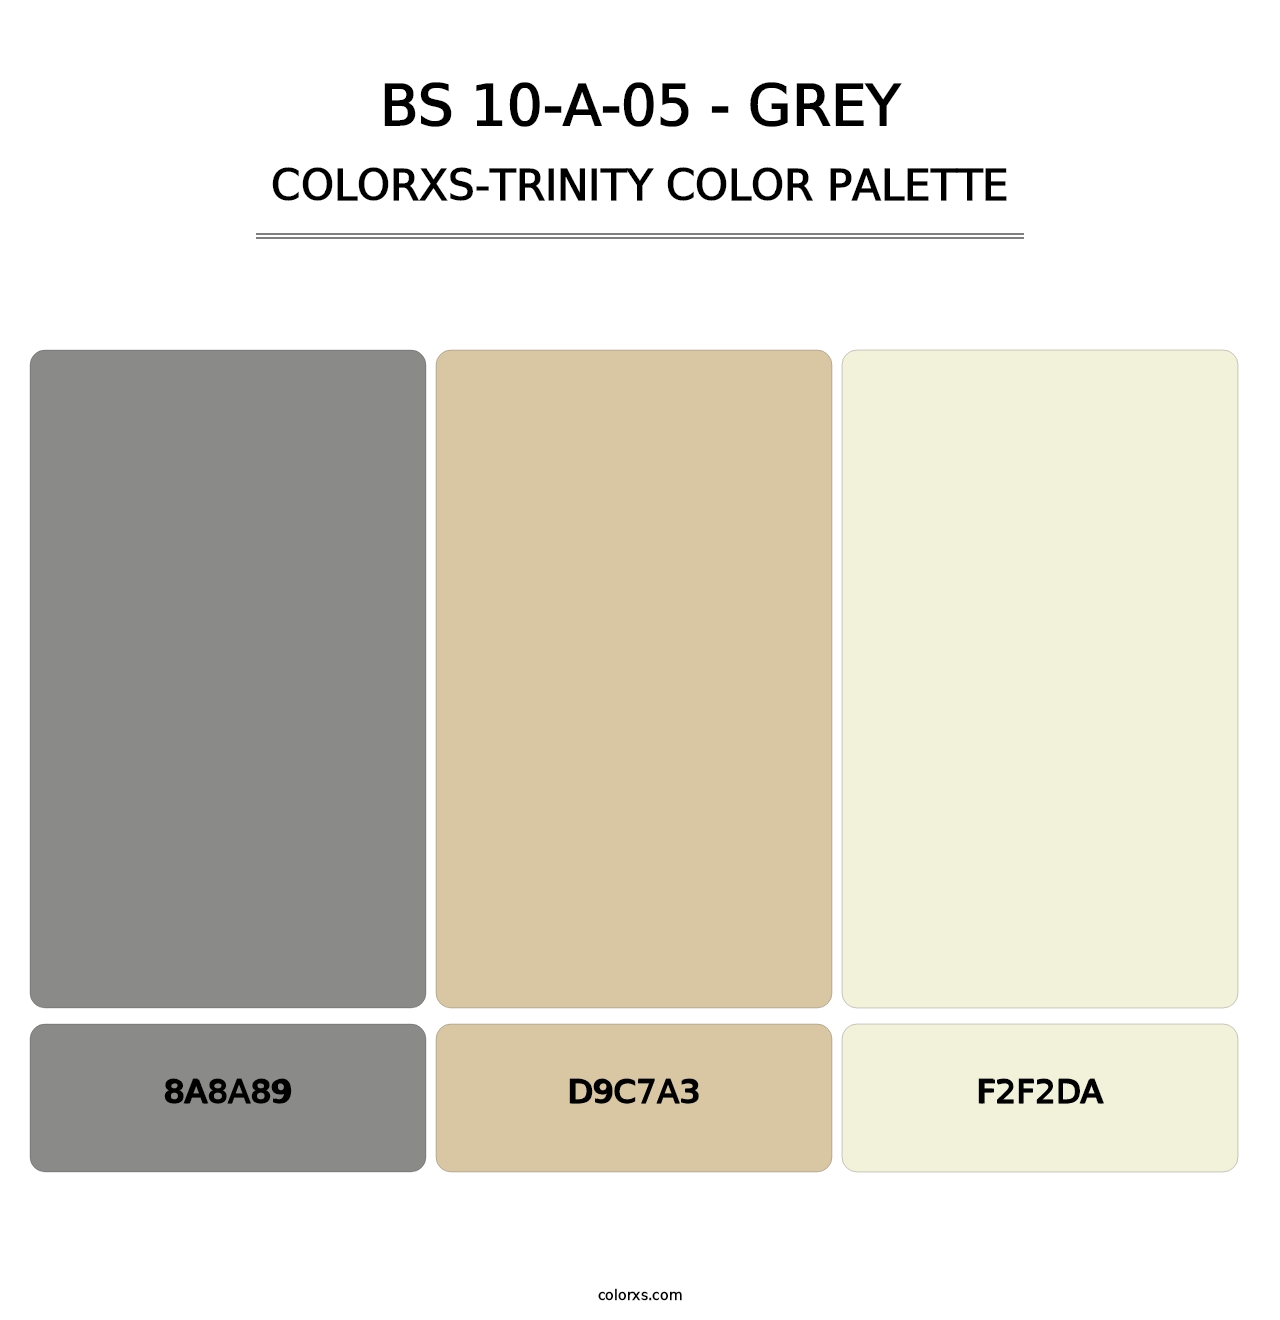 BS 10-A-05 - Grey - Colorxs Trinity Palette